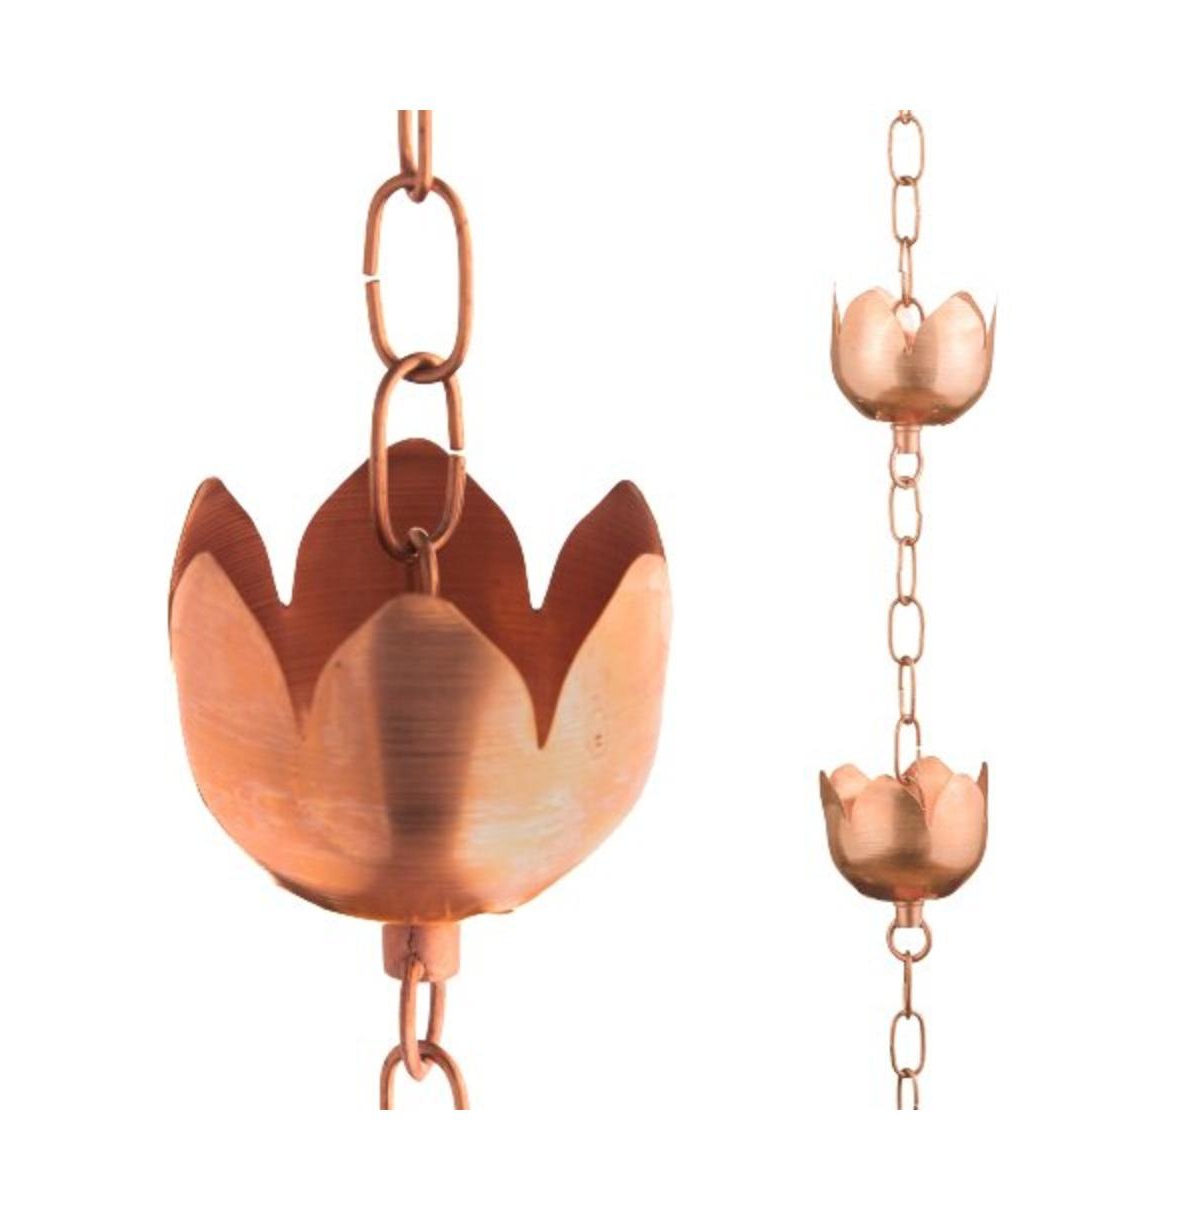 Copper Rain Chain with Tulip Style Cups for Gutter Downspout Replacement - Copper